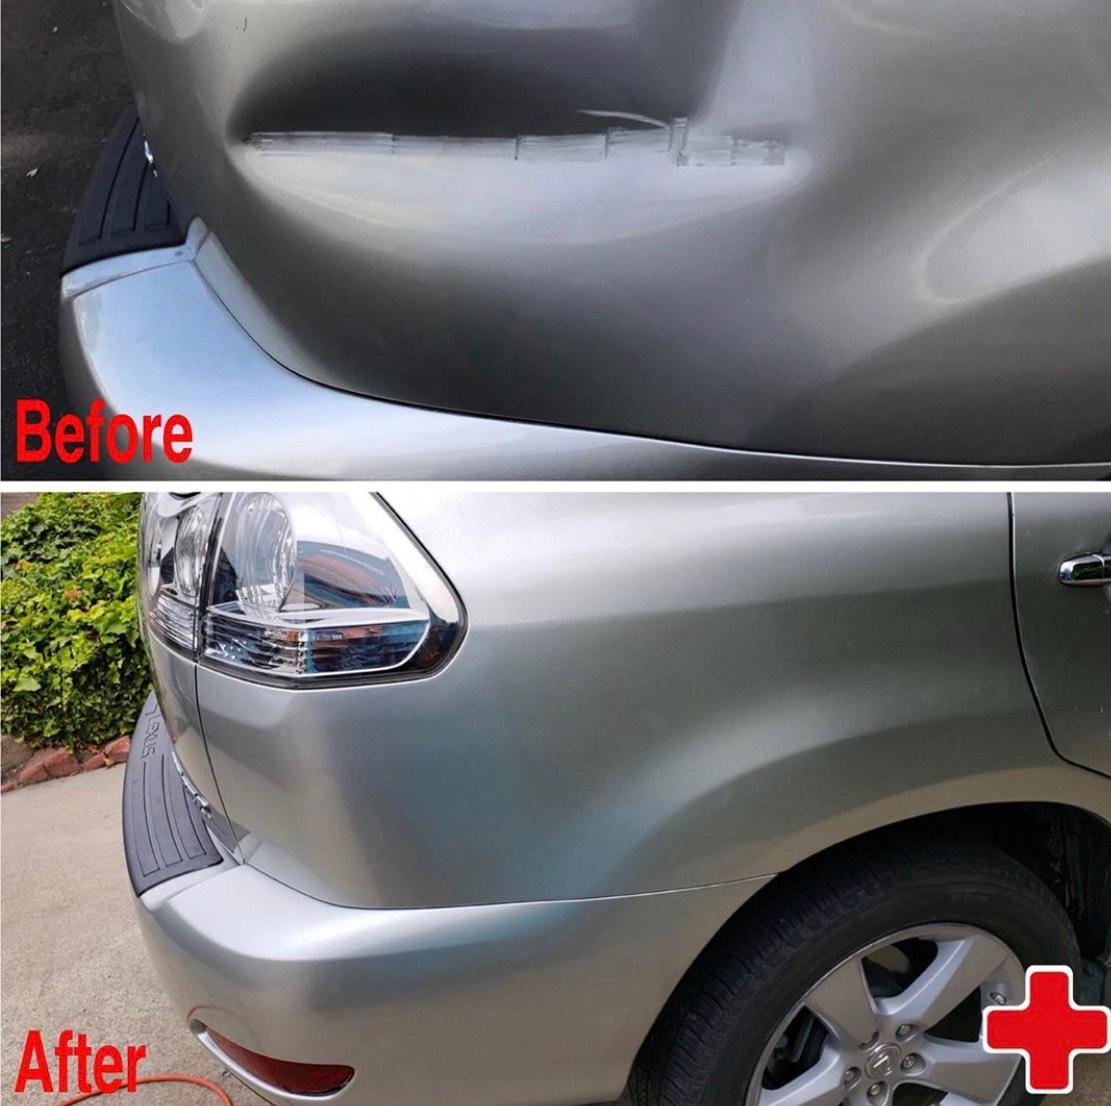 Say goodbye to unsightly dents with Carbulance Mobile Auto Body's expert dent repair services. Our team utilizes advanced techniques and equipment to seamlessly restore your vehicle's appearance, leaving it looking like new in San Diego, CA.